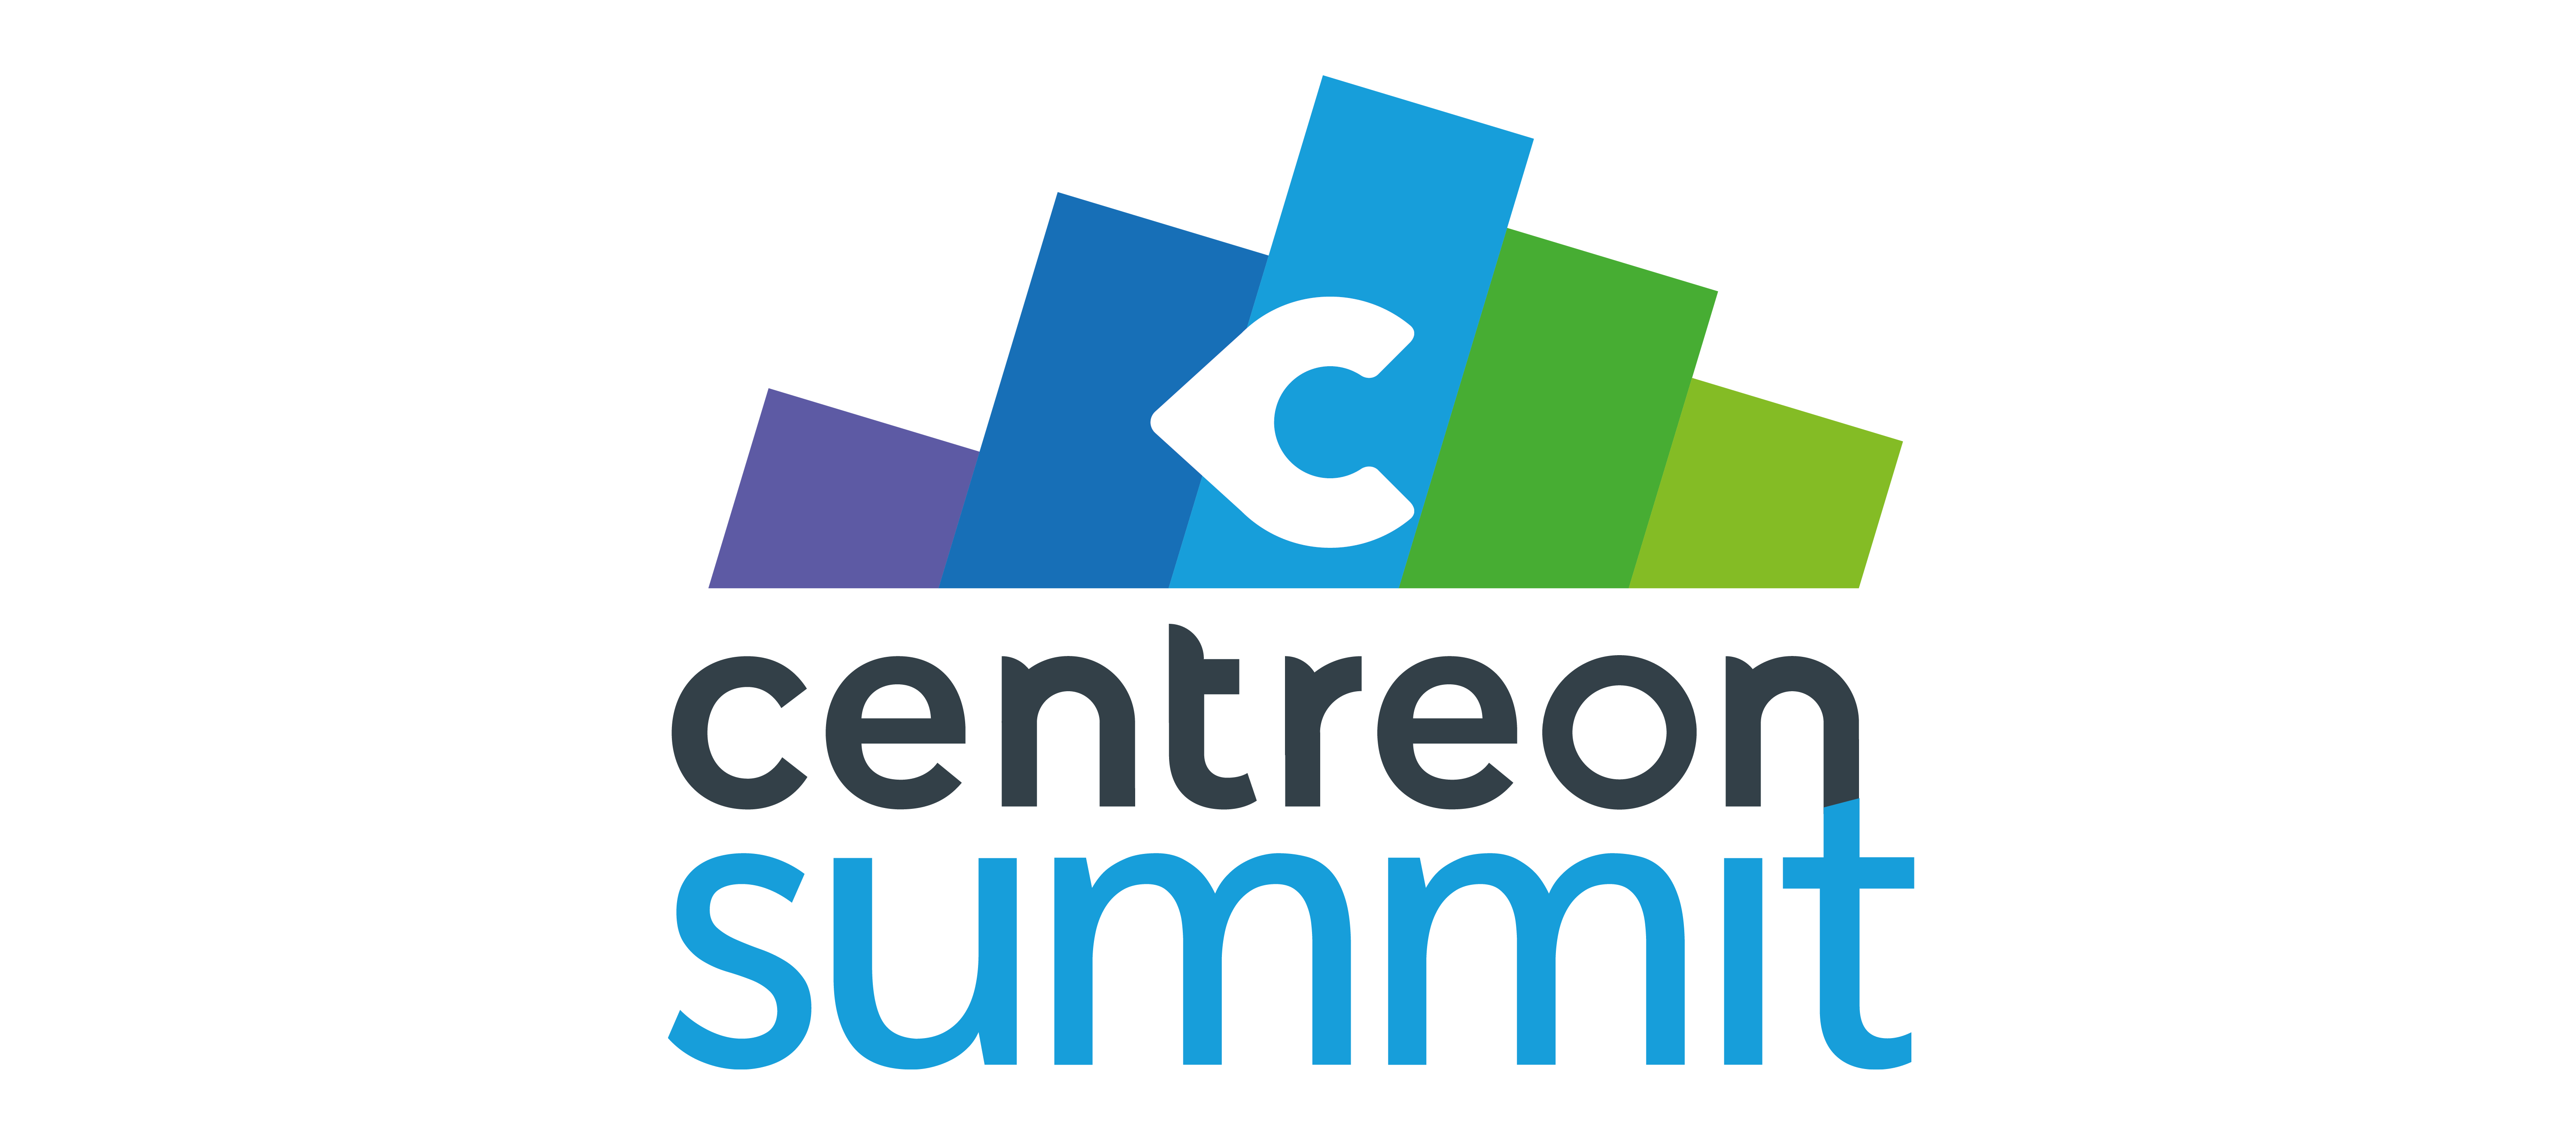 Centreon Summit is today! Here are 5 good reasons to attend!